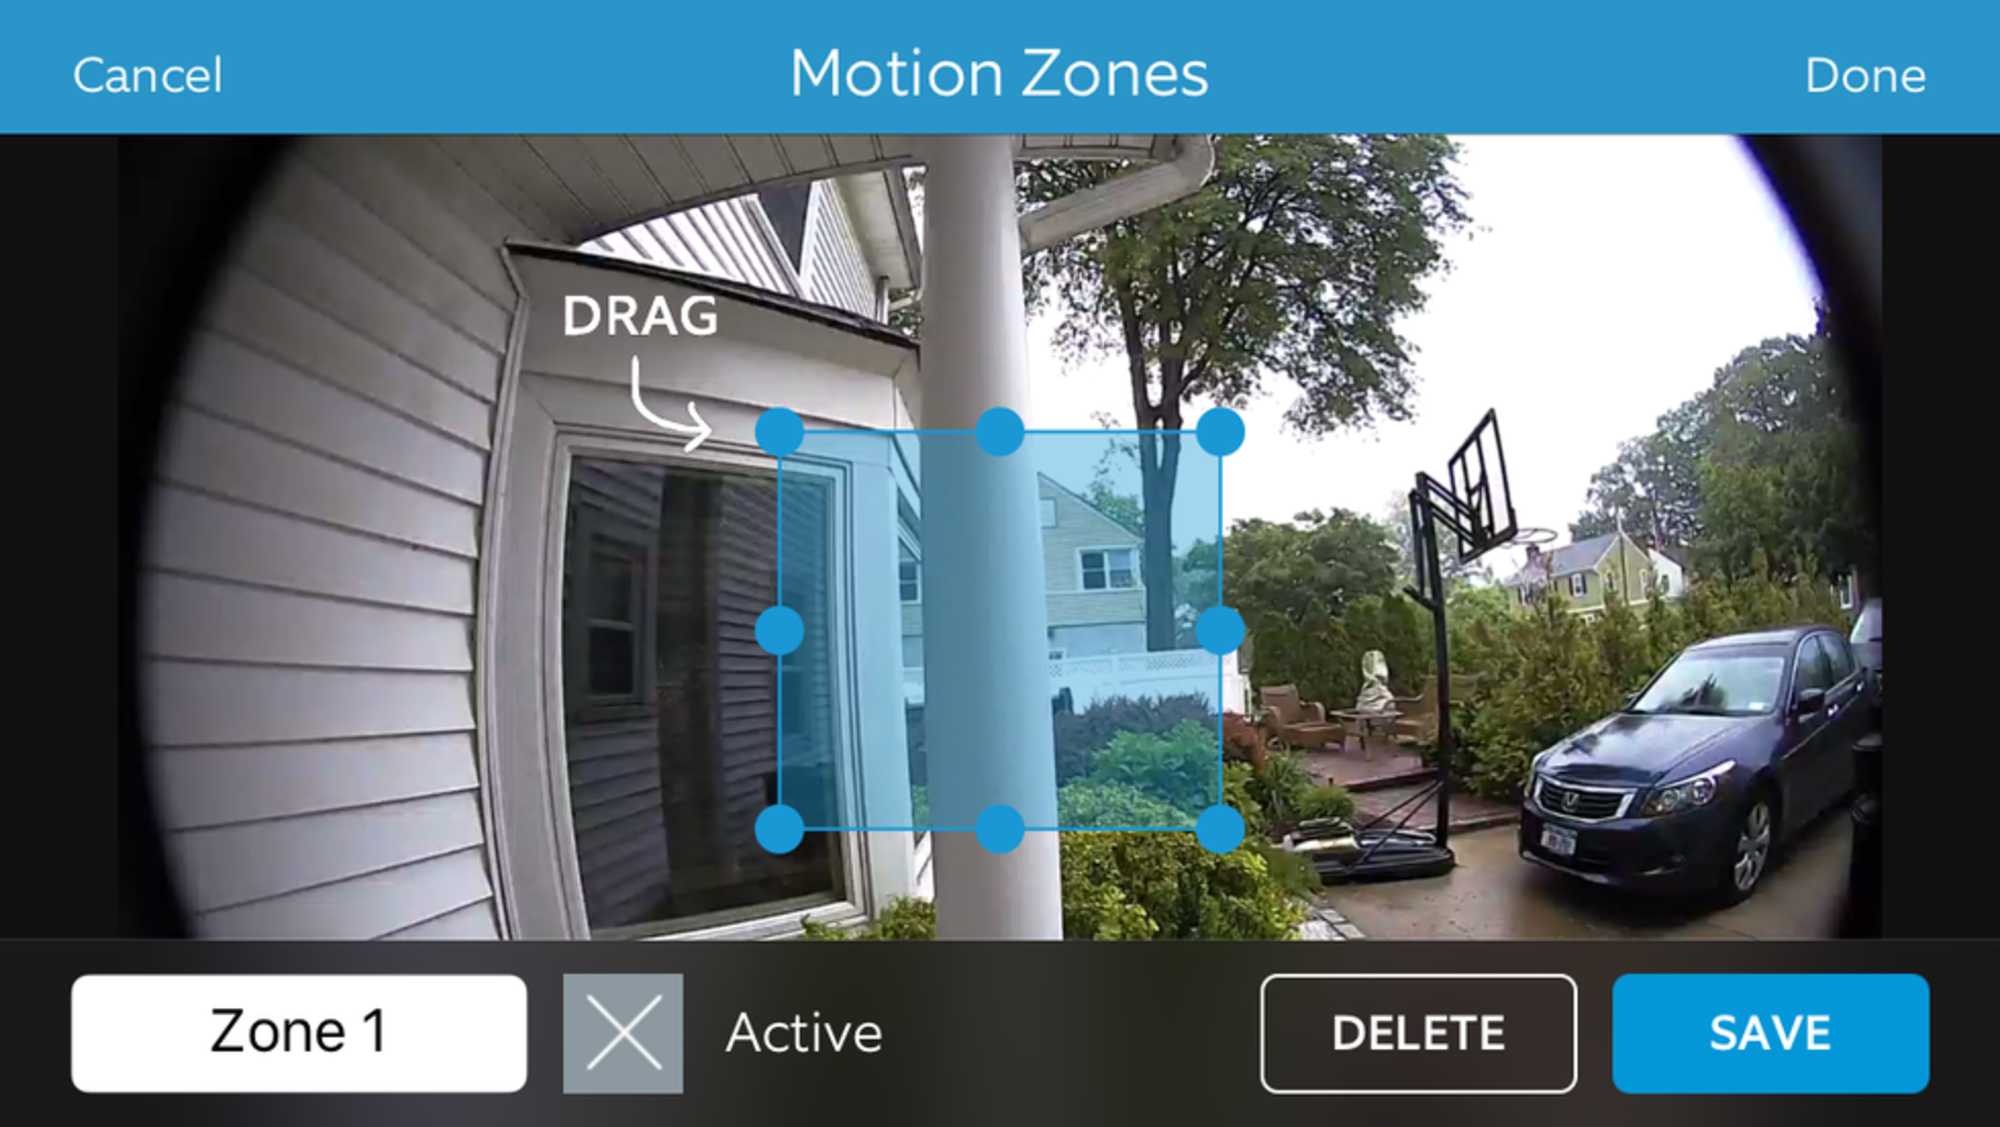 TikToker explains how to access special Ring doorbell features